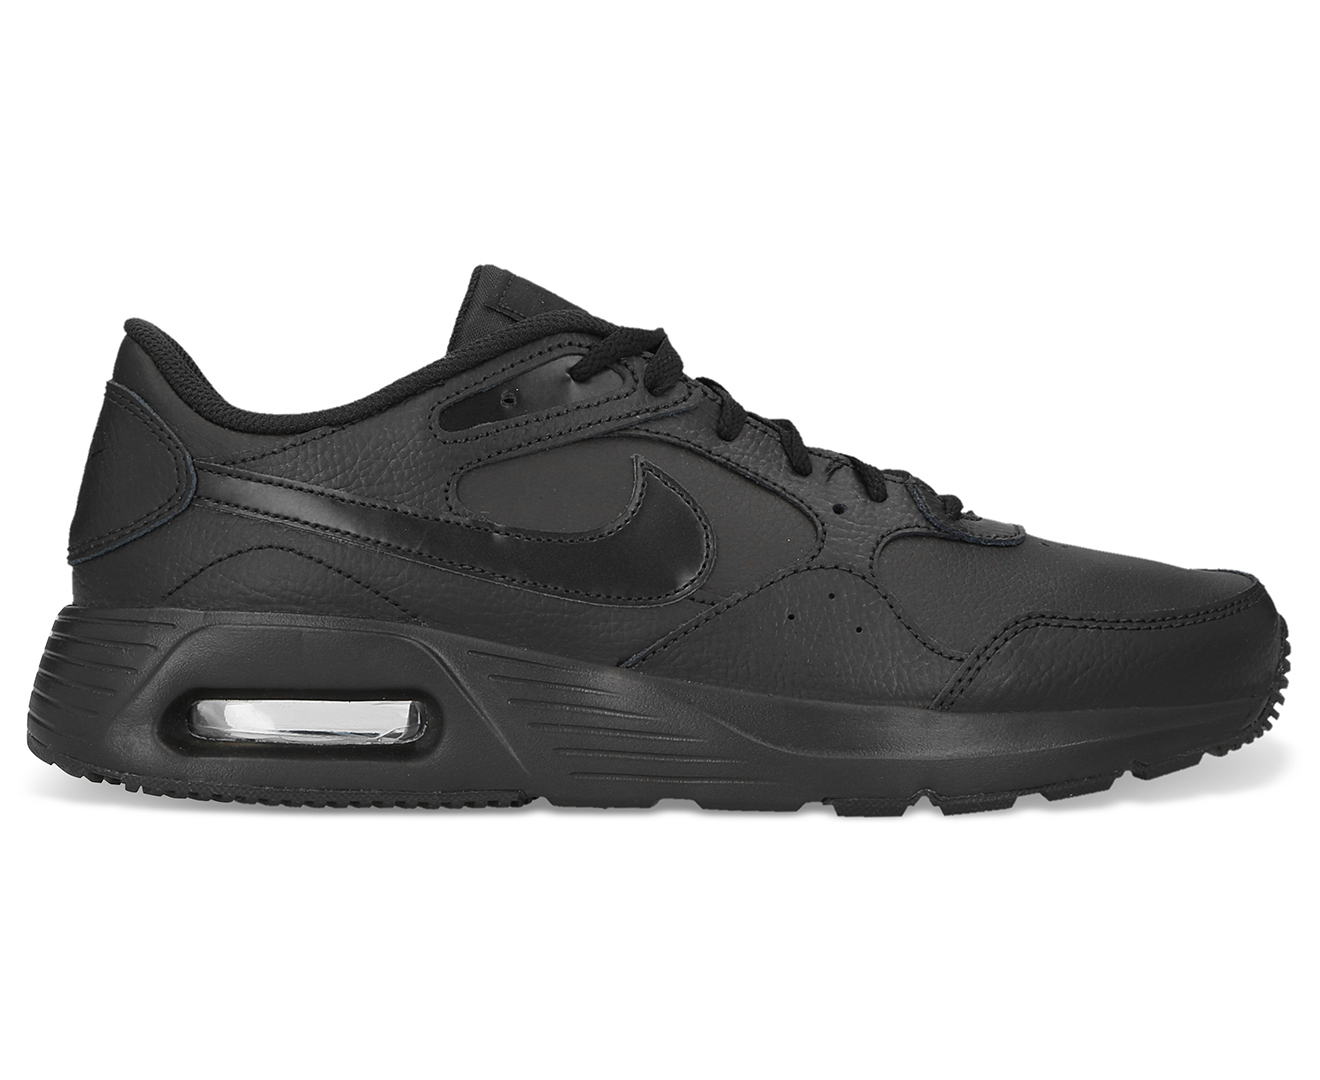 Nike Men's Air Max SC Leather Sneakers - Black | Www.catch.co.nz